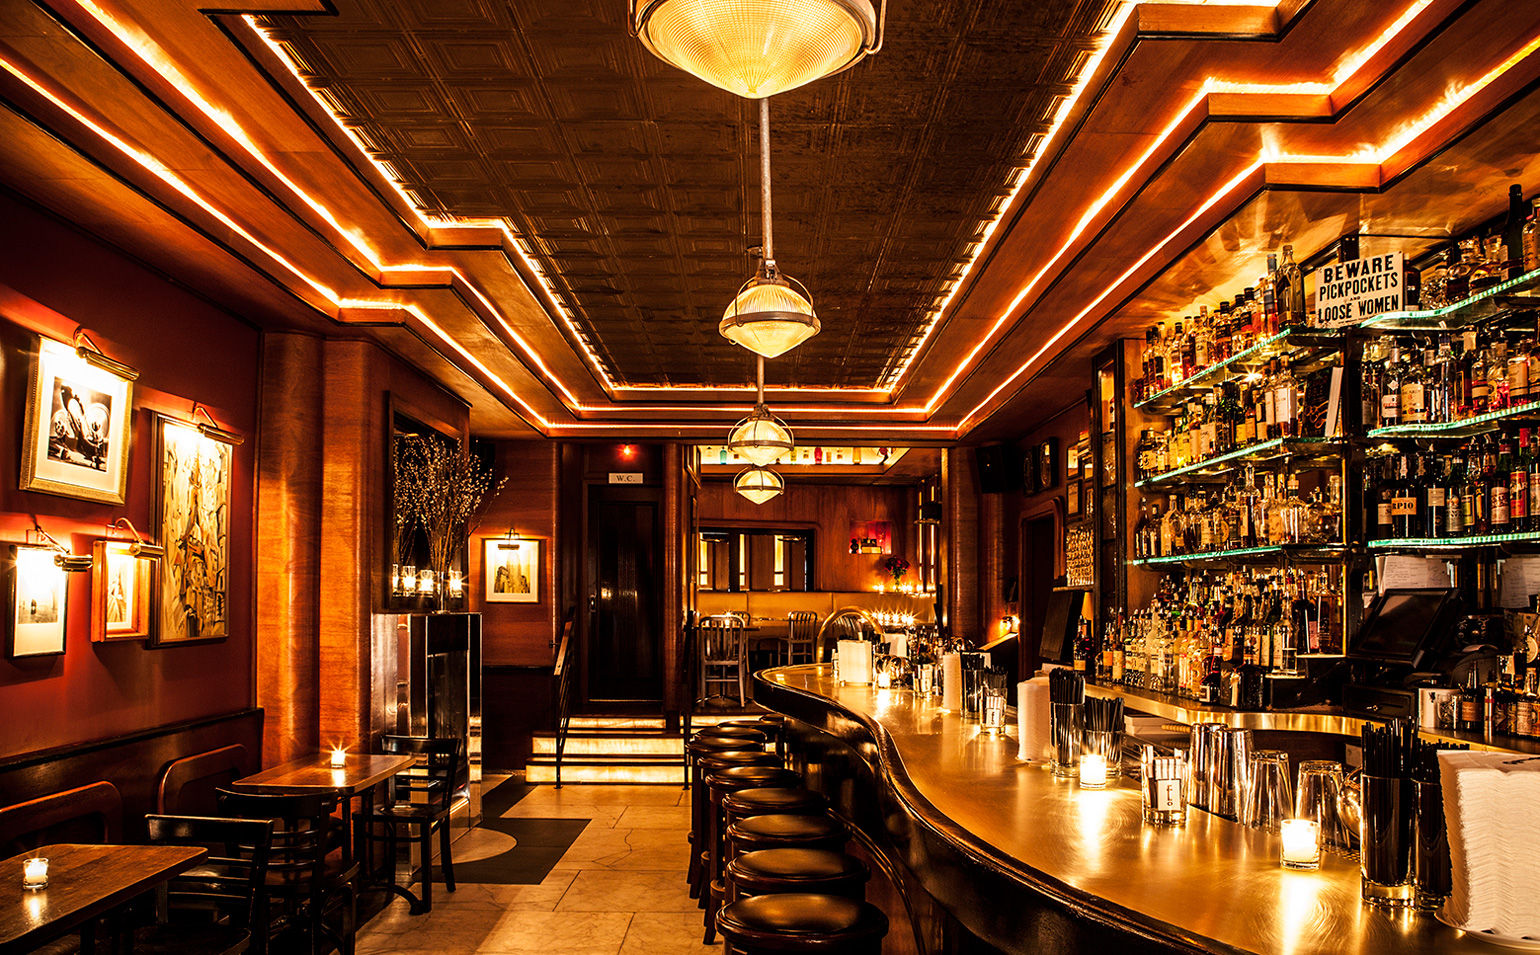 World-famous NYC speakeasy Employees Only will debut in Hong Kong this June